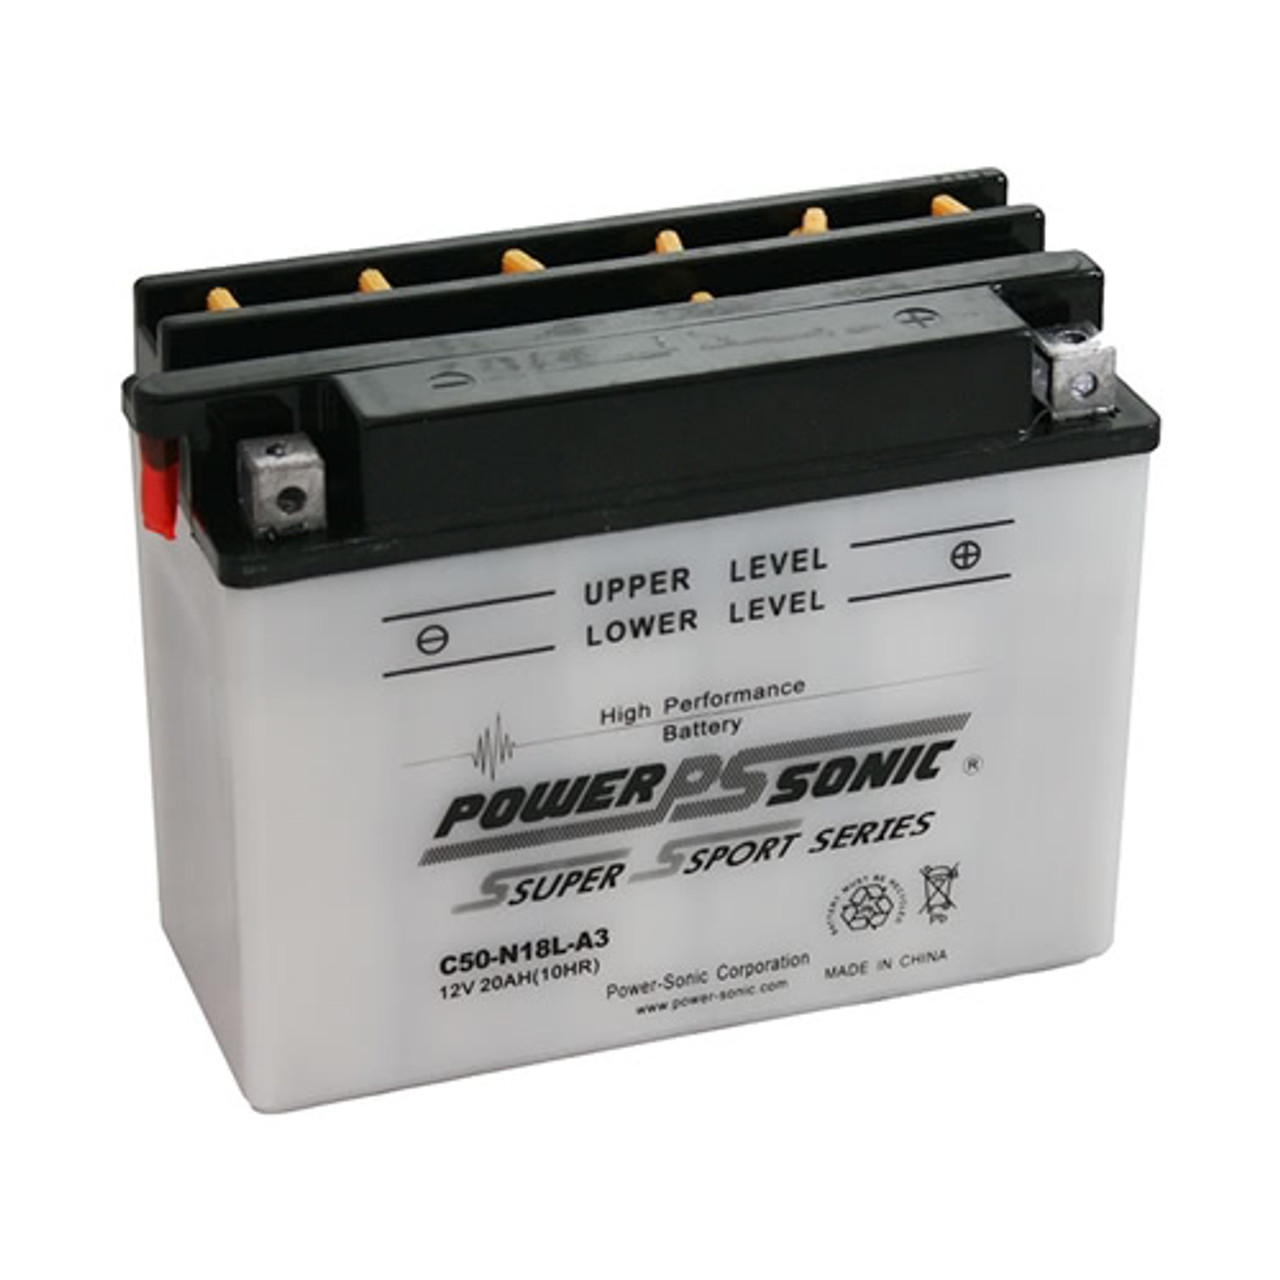 Autozone Motorcycle Battery Tender Reviewmotors.co